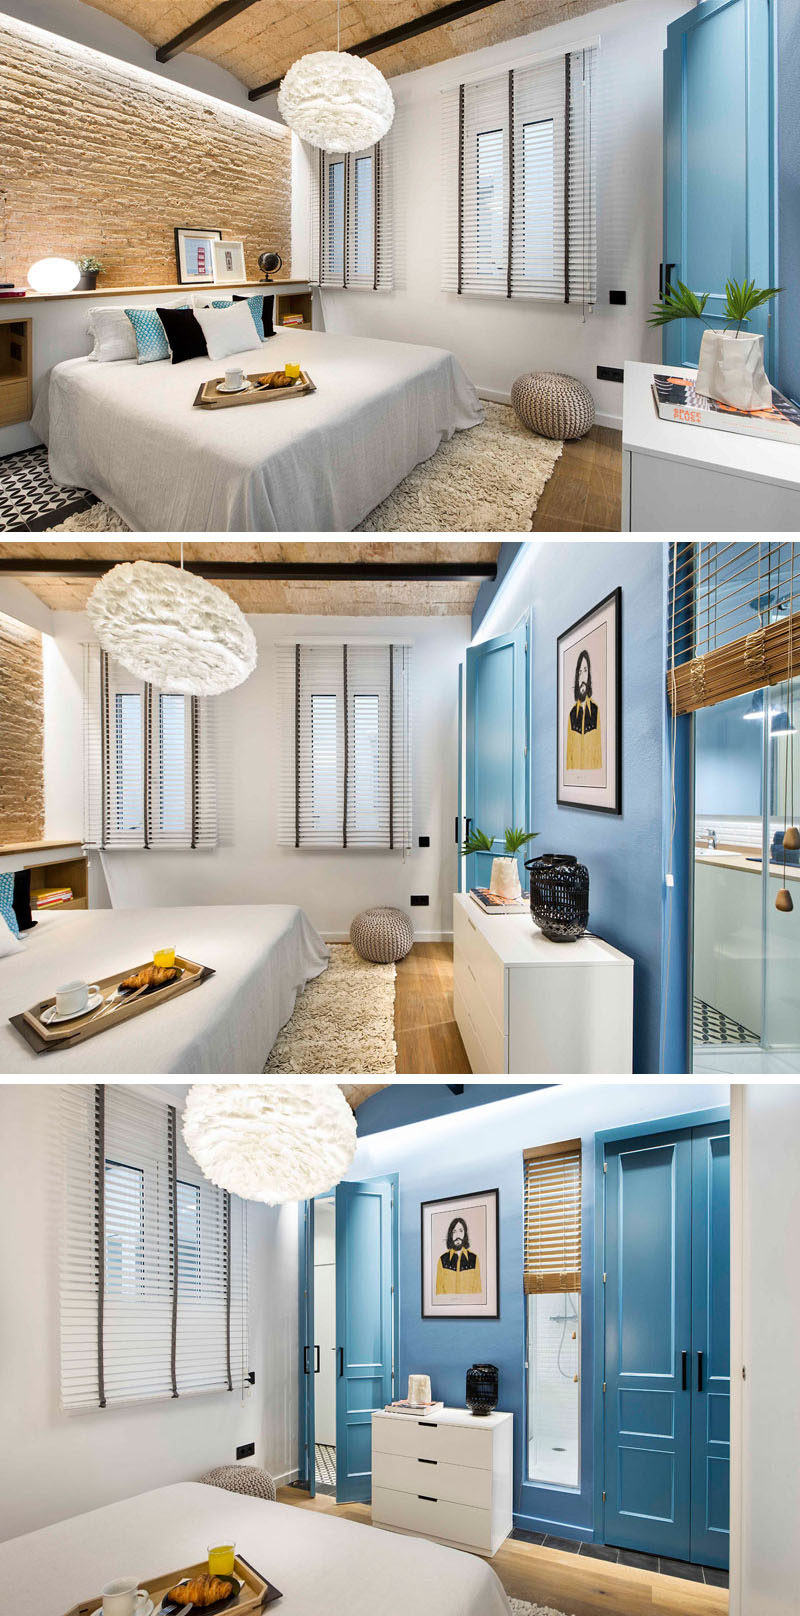 The calming palette in this modern bedroom features touches of blue to go along with the white, wood, and brick. A white pendant light above the bed brings in extra brightness and adds even more texture to the room. Blue doors and a narrow window connect the bedroom and allow the bathroom to as private or as public as you like.